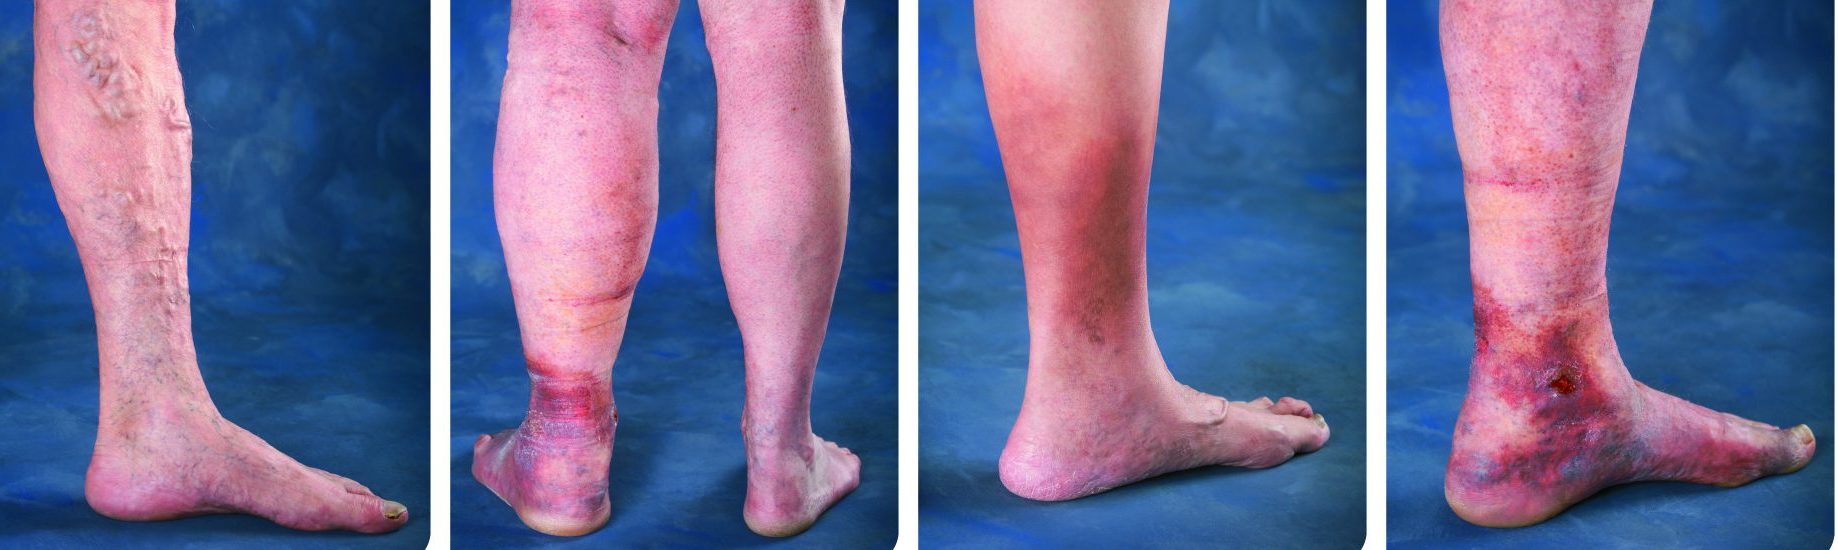 Chronic Venous Insufficiency Patient Norfolk, MA - Specialty Vein Care